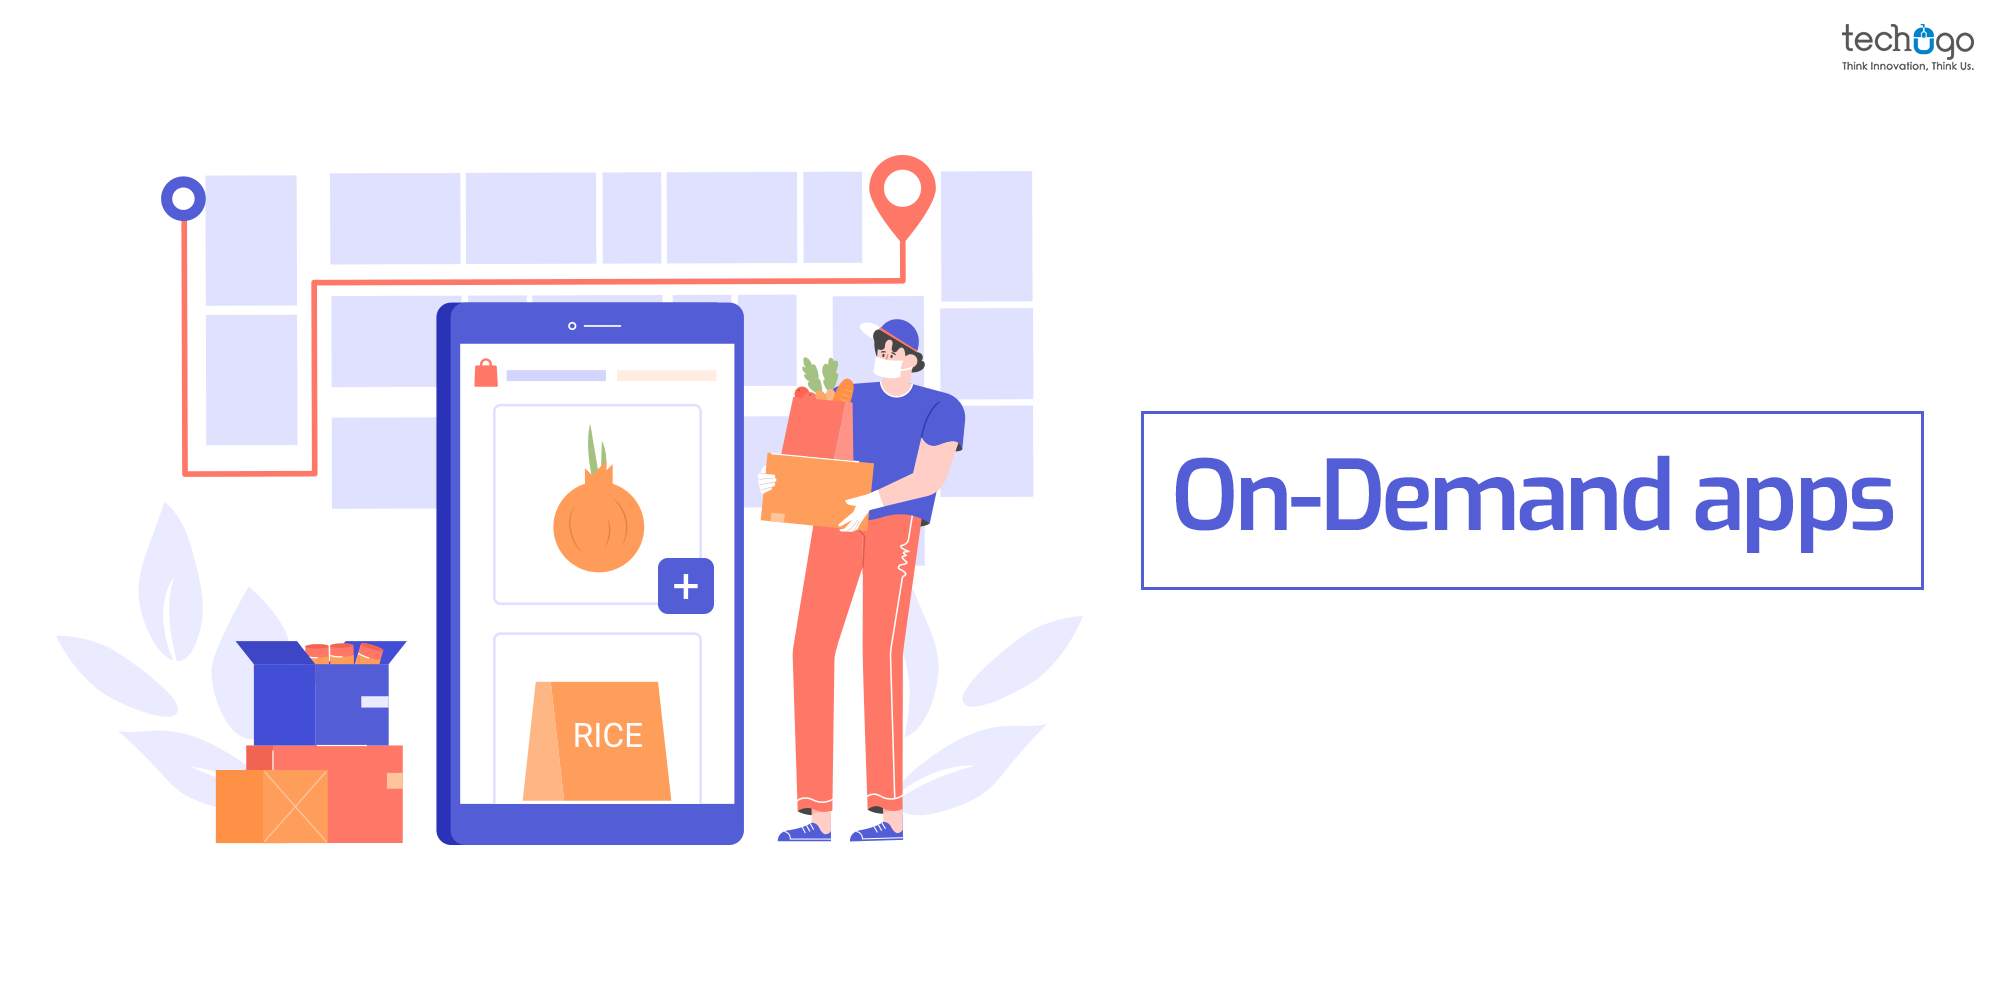 On-Demand apps